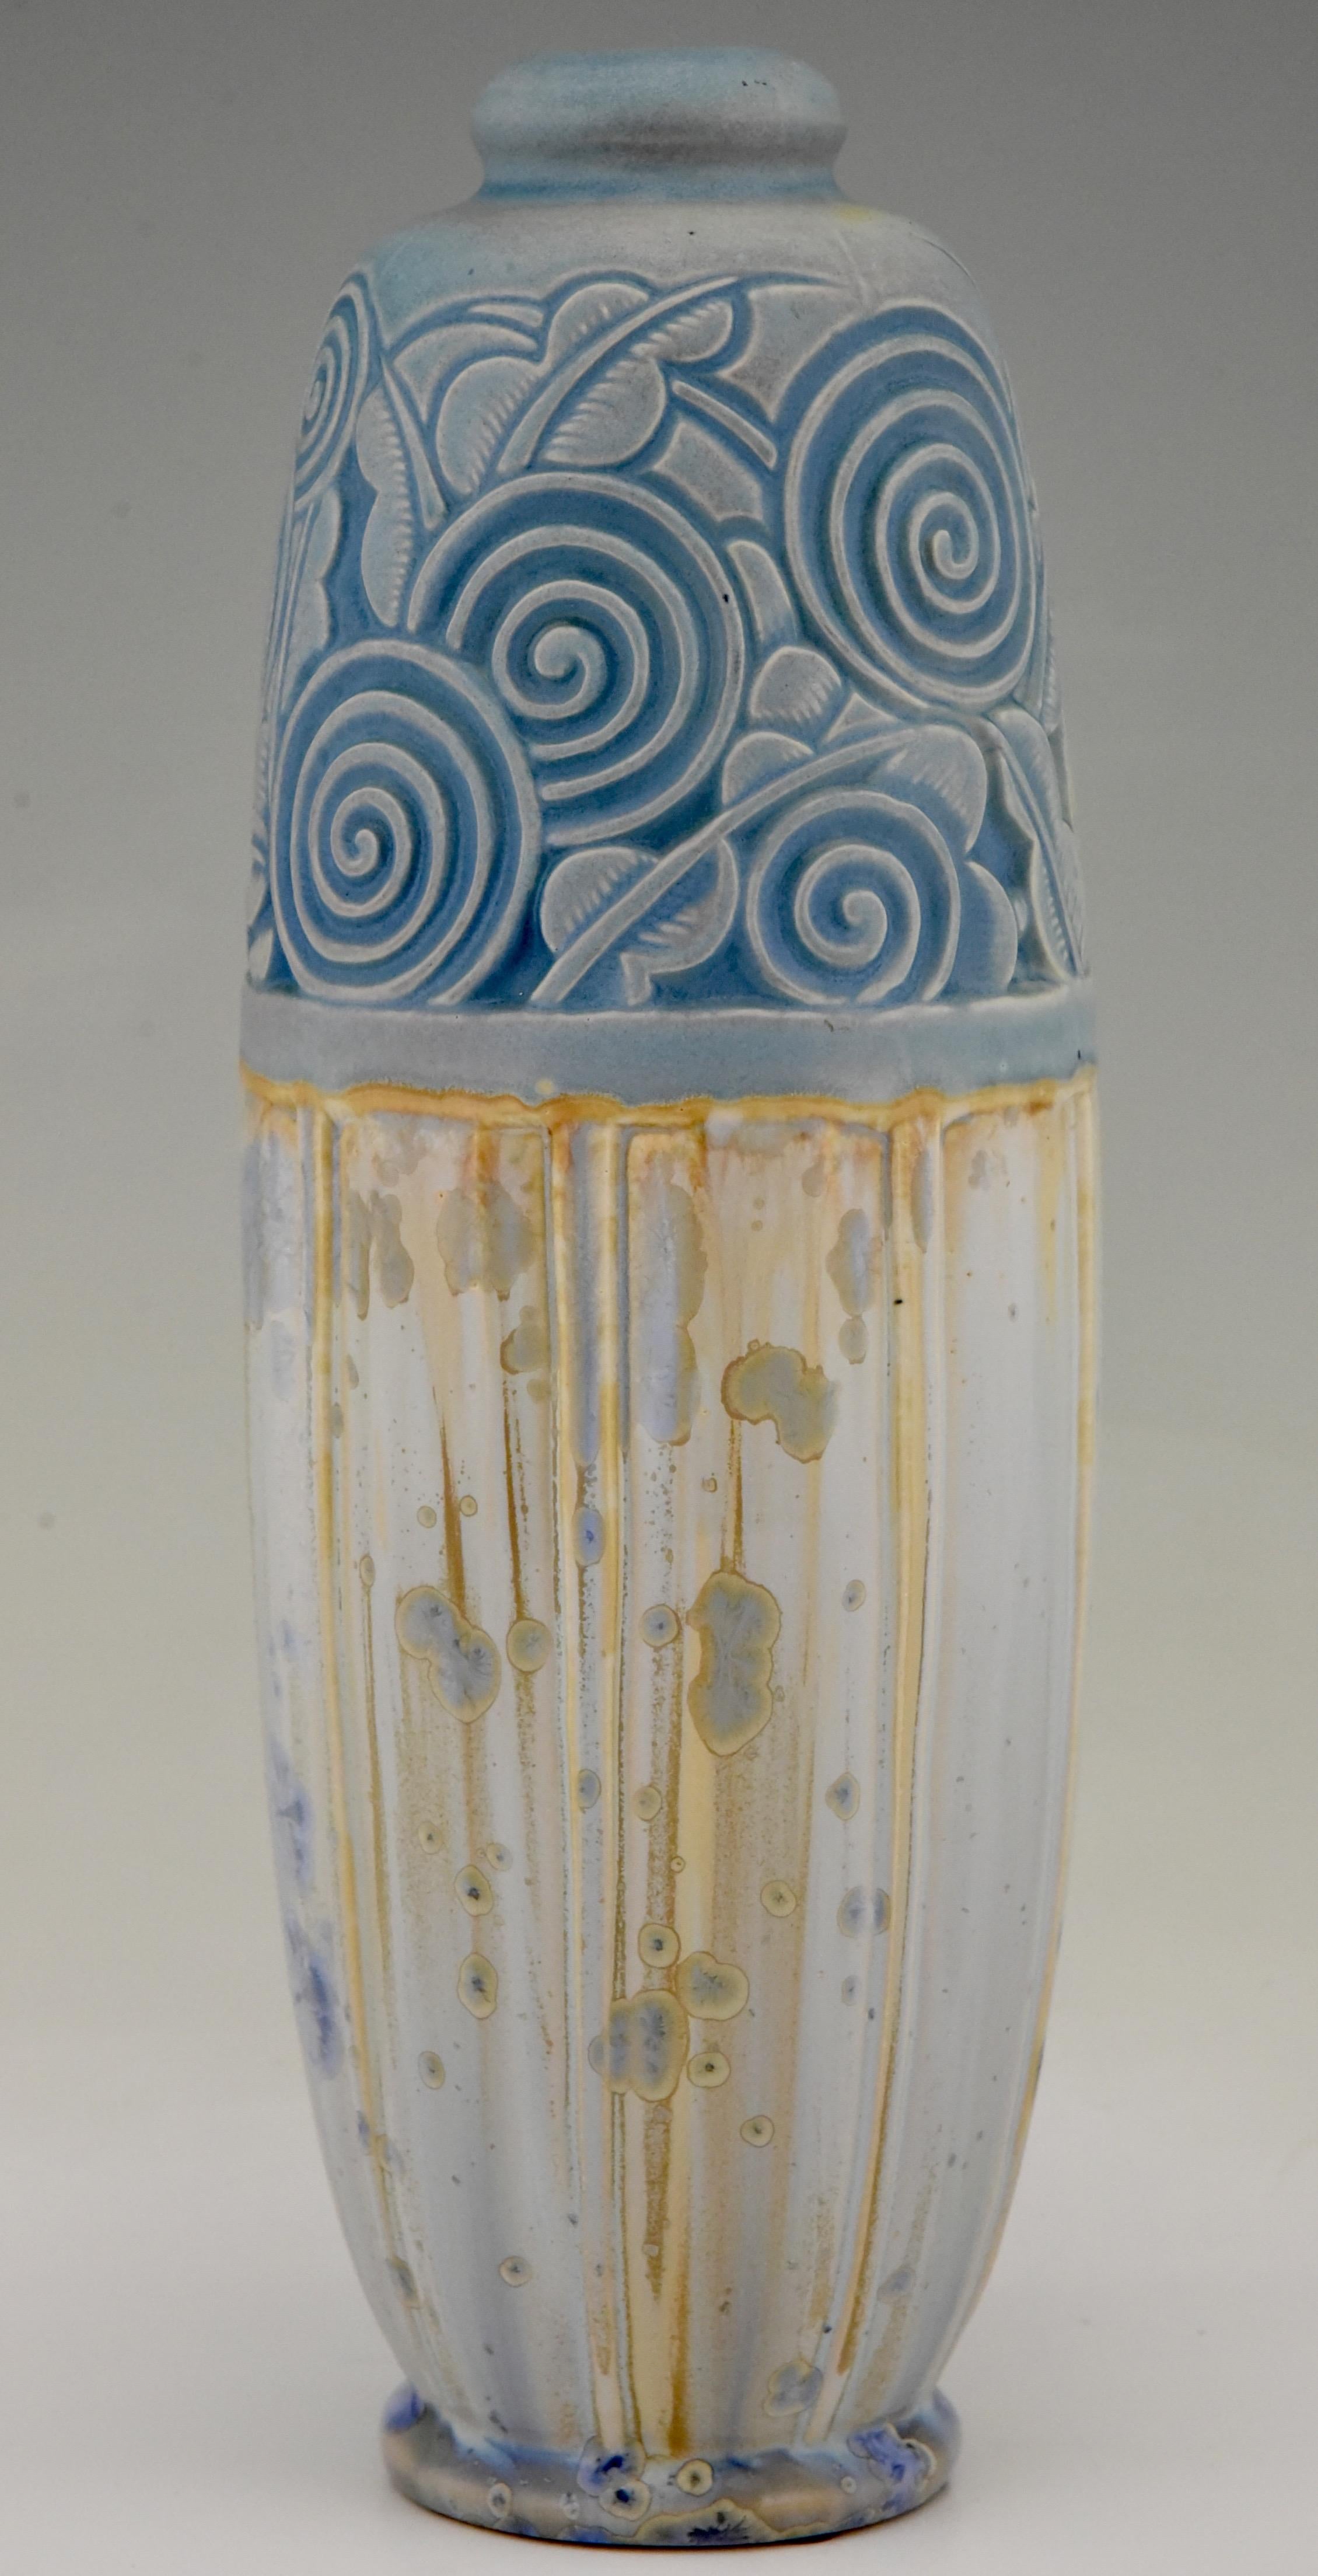 Art Deco ceramic vase with stylized flowers and leaves by Gaston Ventrillon (or Ventrillon le Jeune) for Mougin Nancy, France, 1925.
The grès ceramic vase has beautiful colors, an incised flower decor and a special glaze with crystallizations.